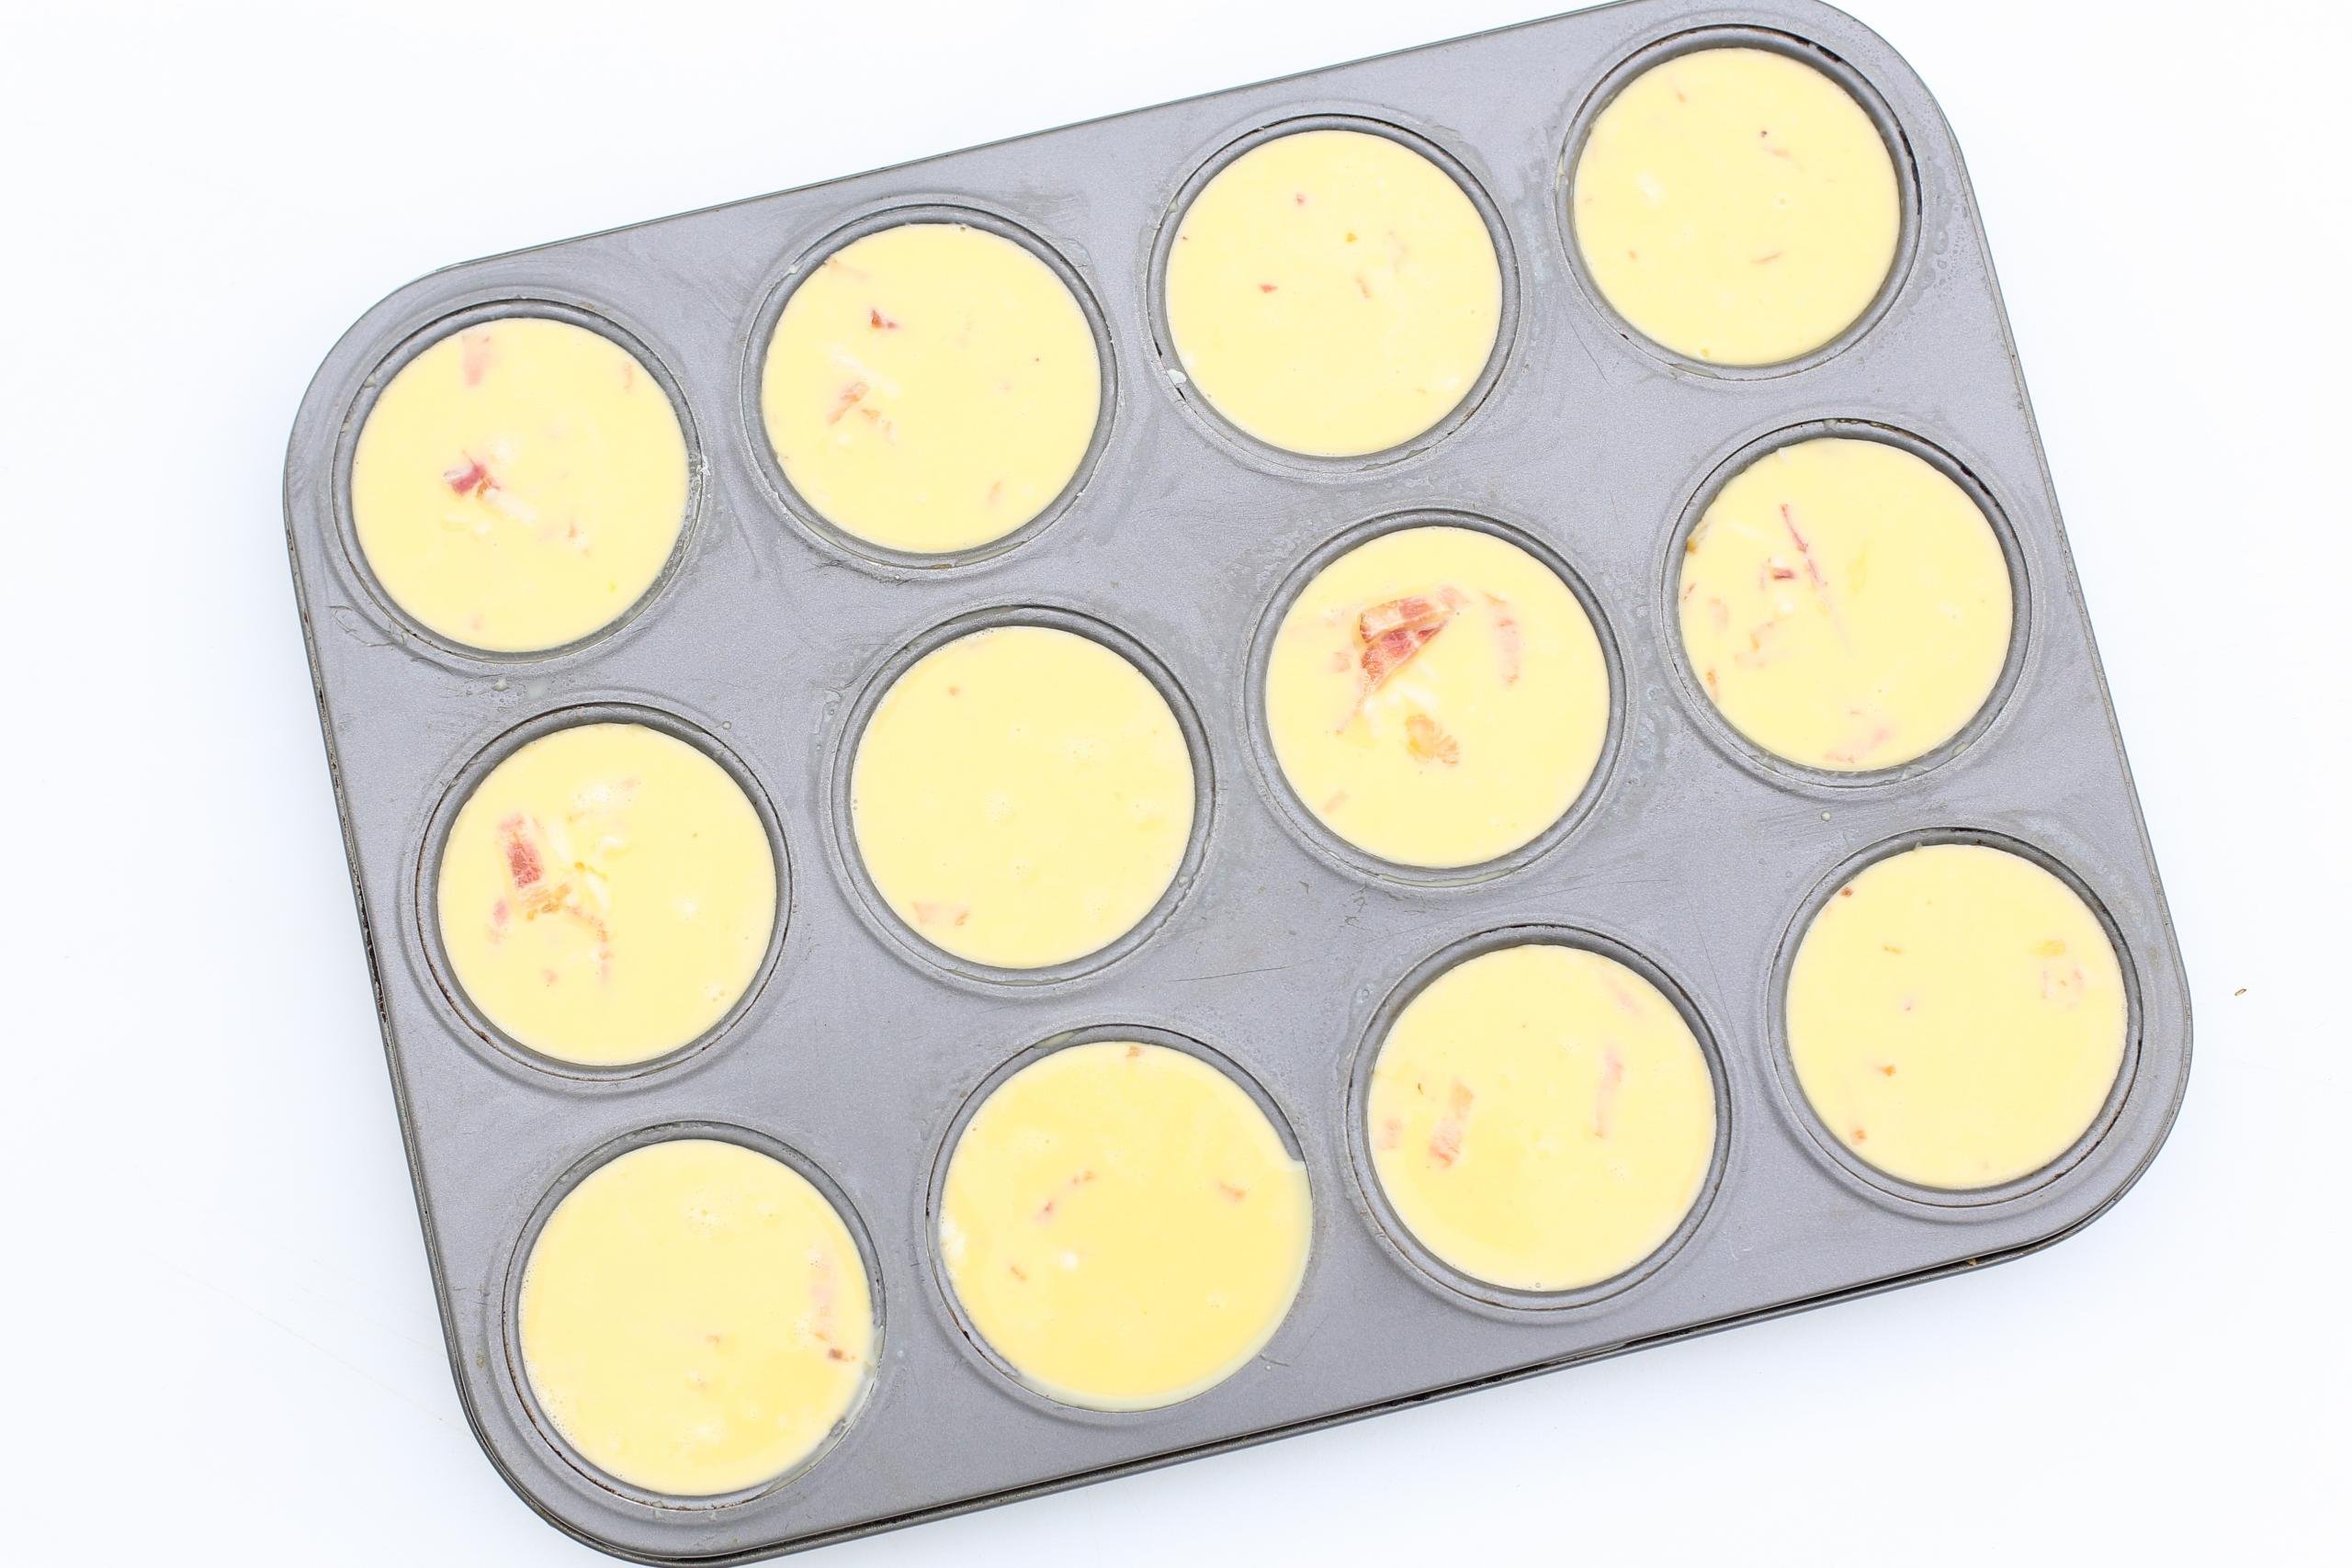 Starbucks Bacon Egg Bites at Home in a Muffin Pan - Cirque du SoLayne